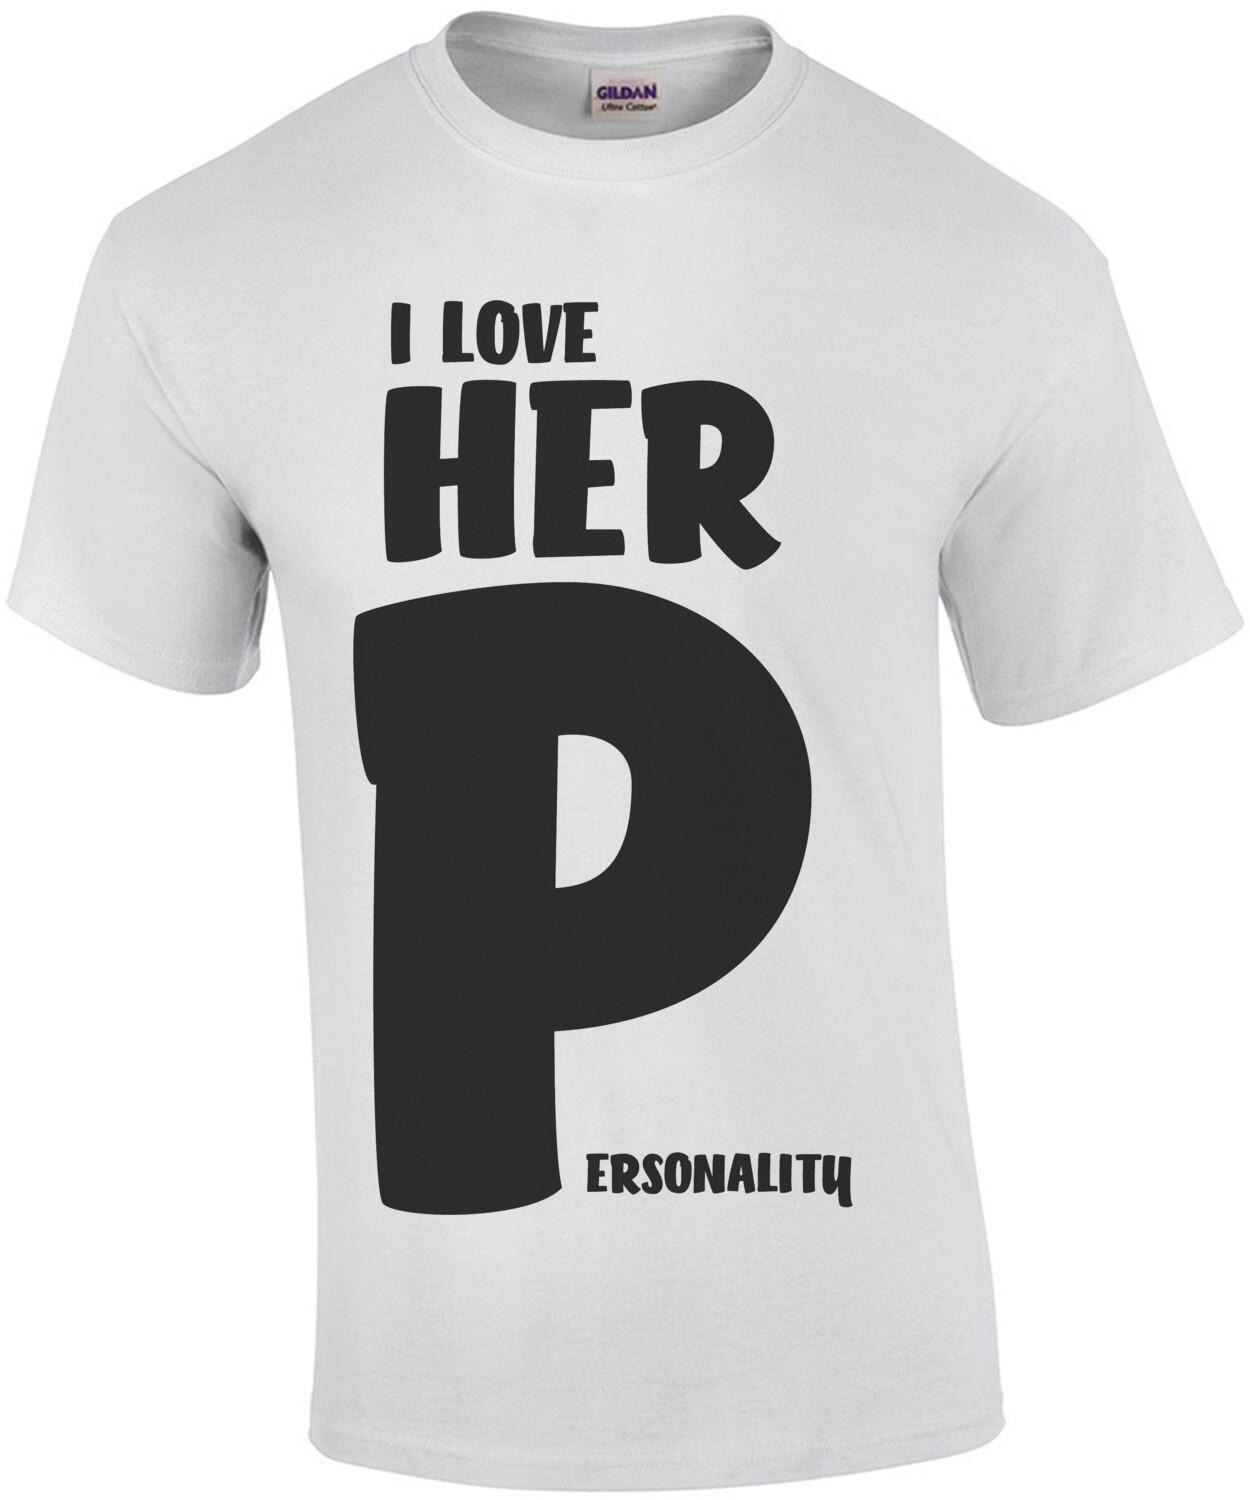 I love her Personality - offensive funny couple's t-shirt